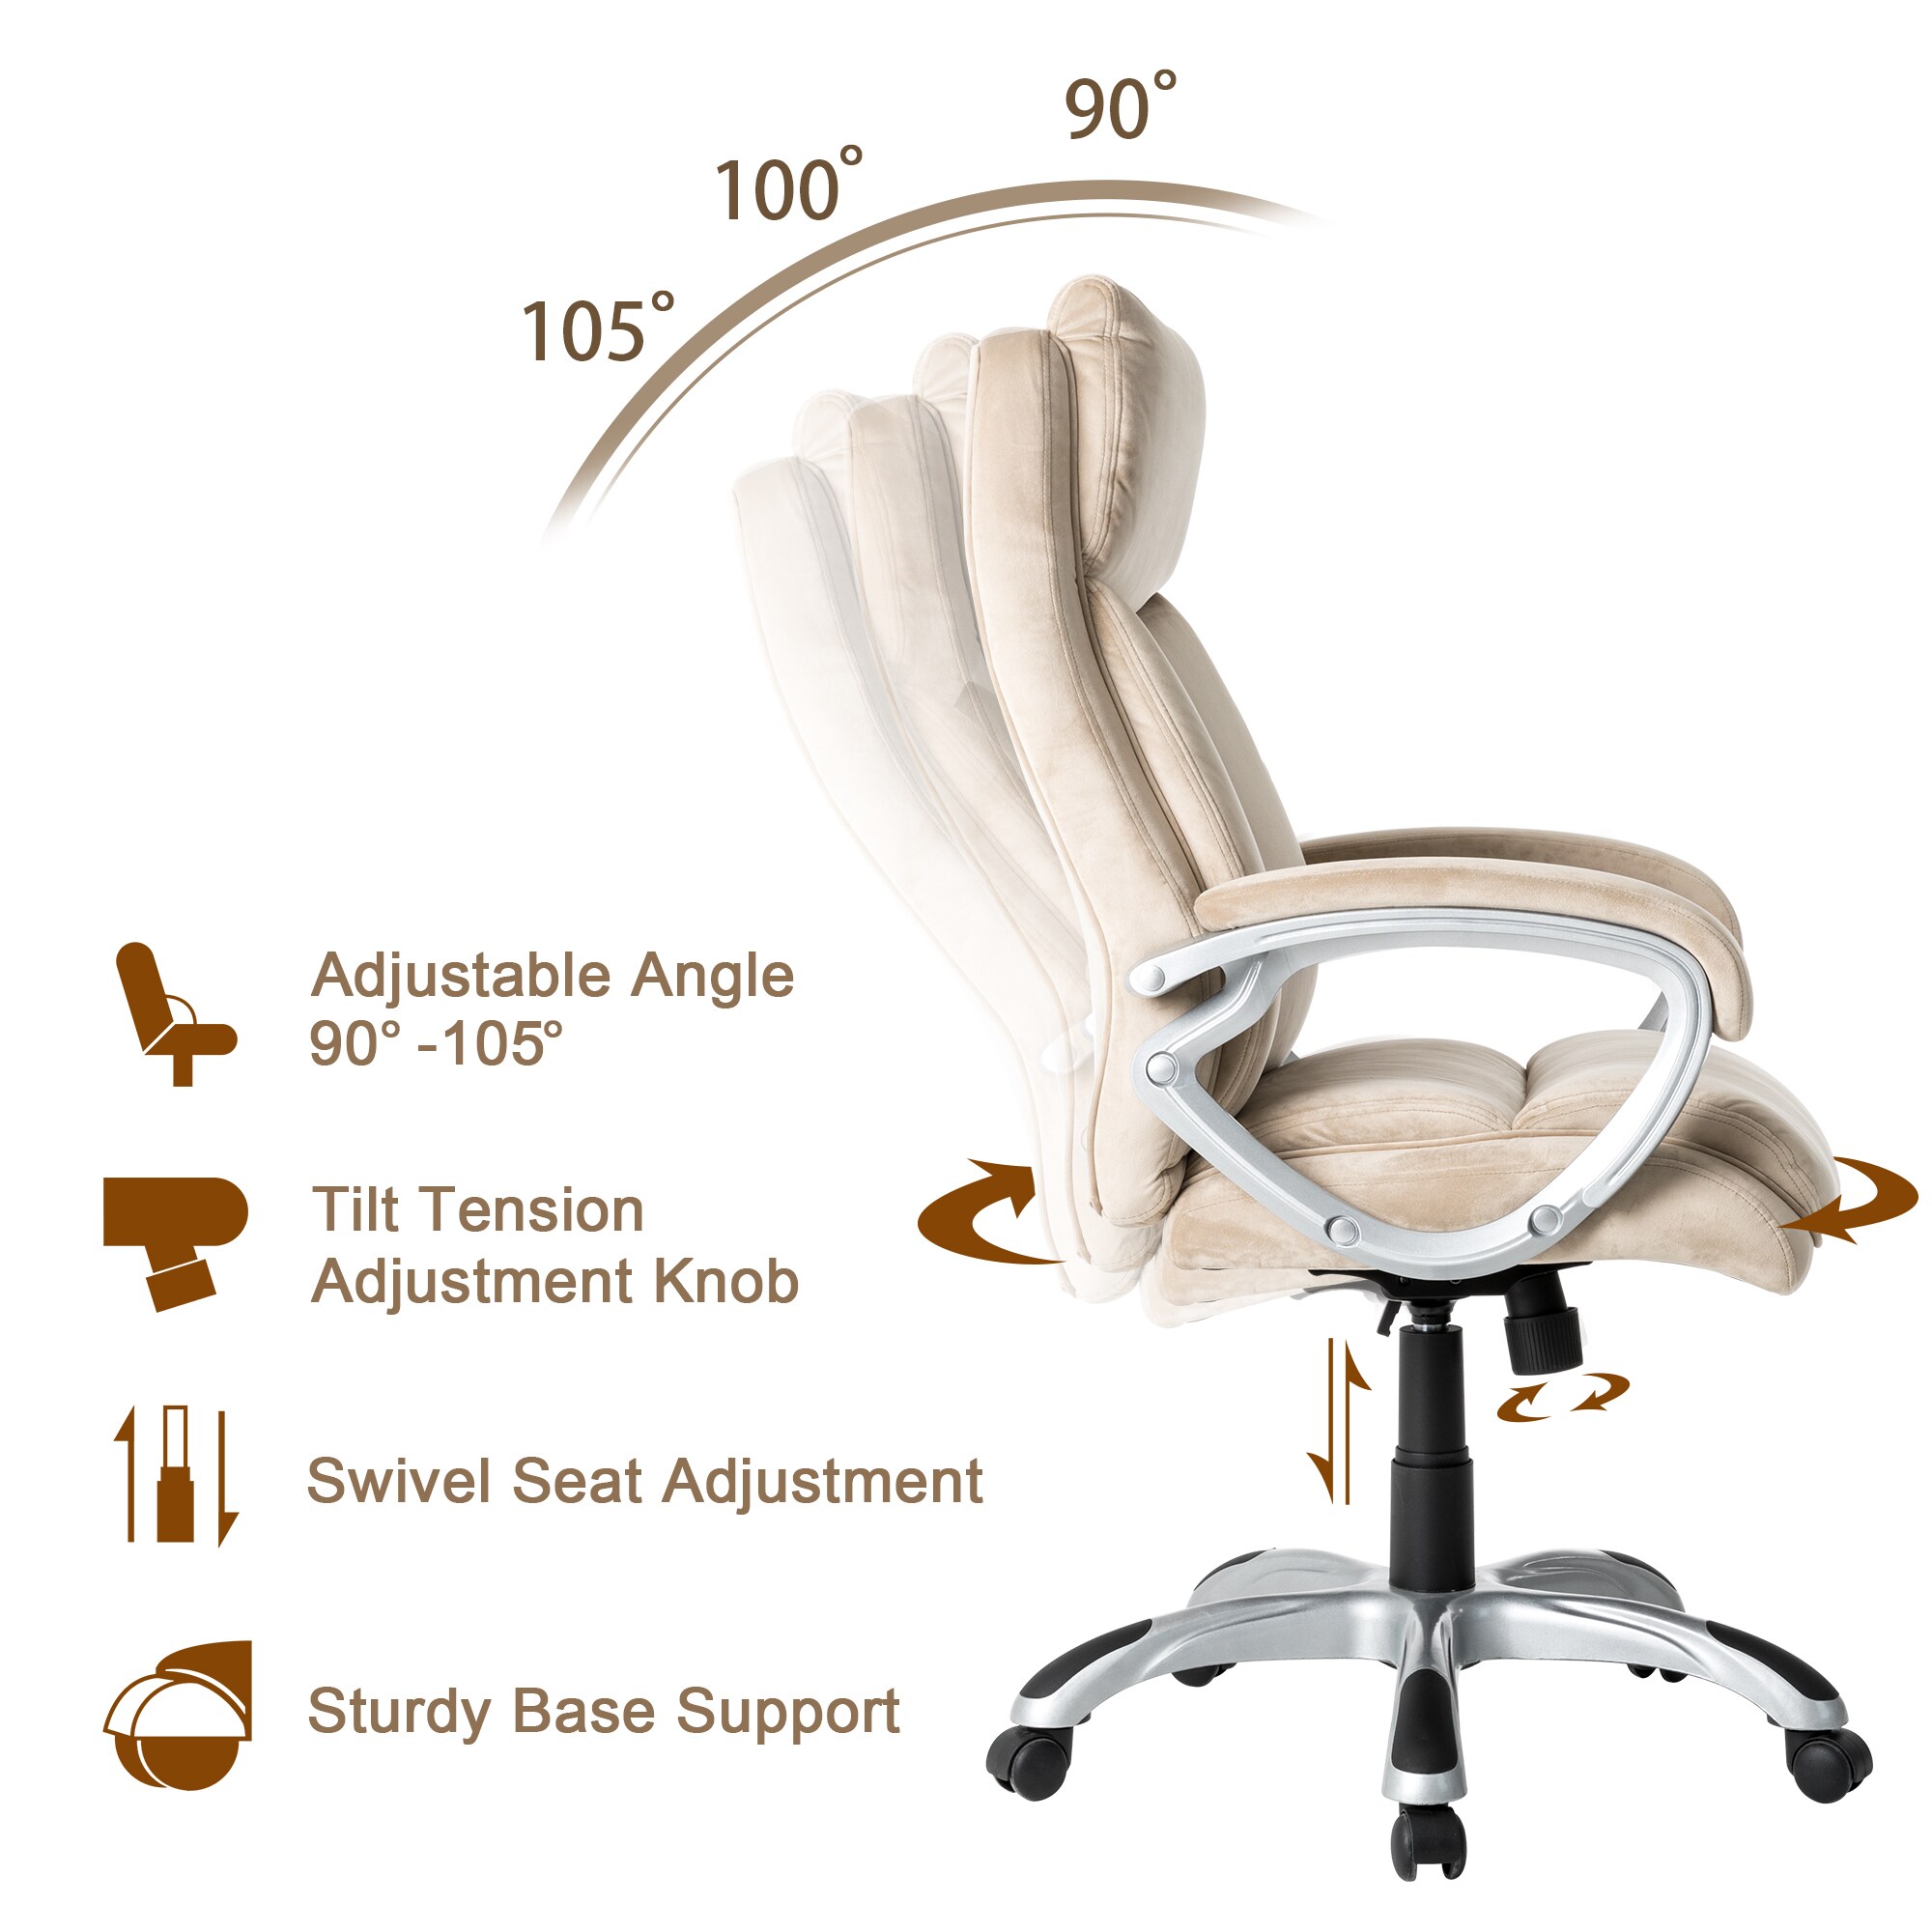 Glitzhome Leatherette Executive Office Chair with Pneumatic Lift, Cream, White